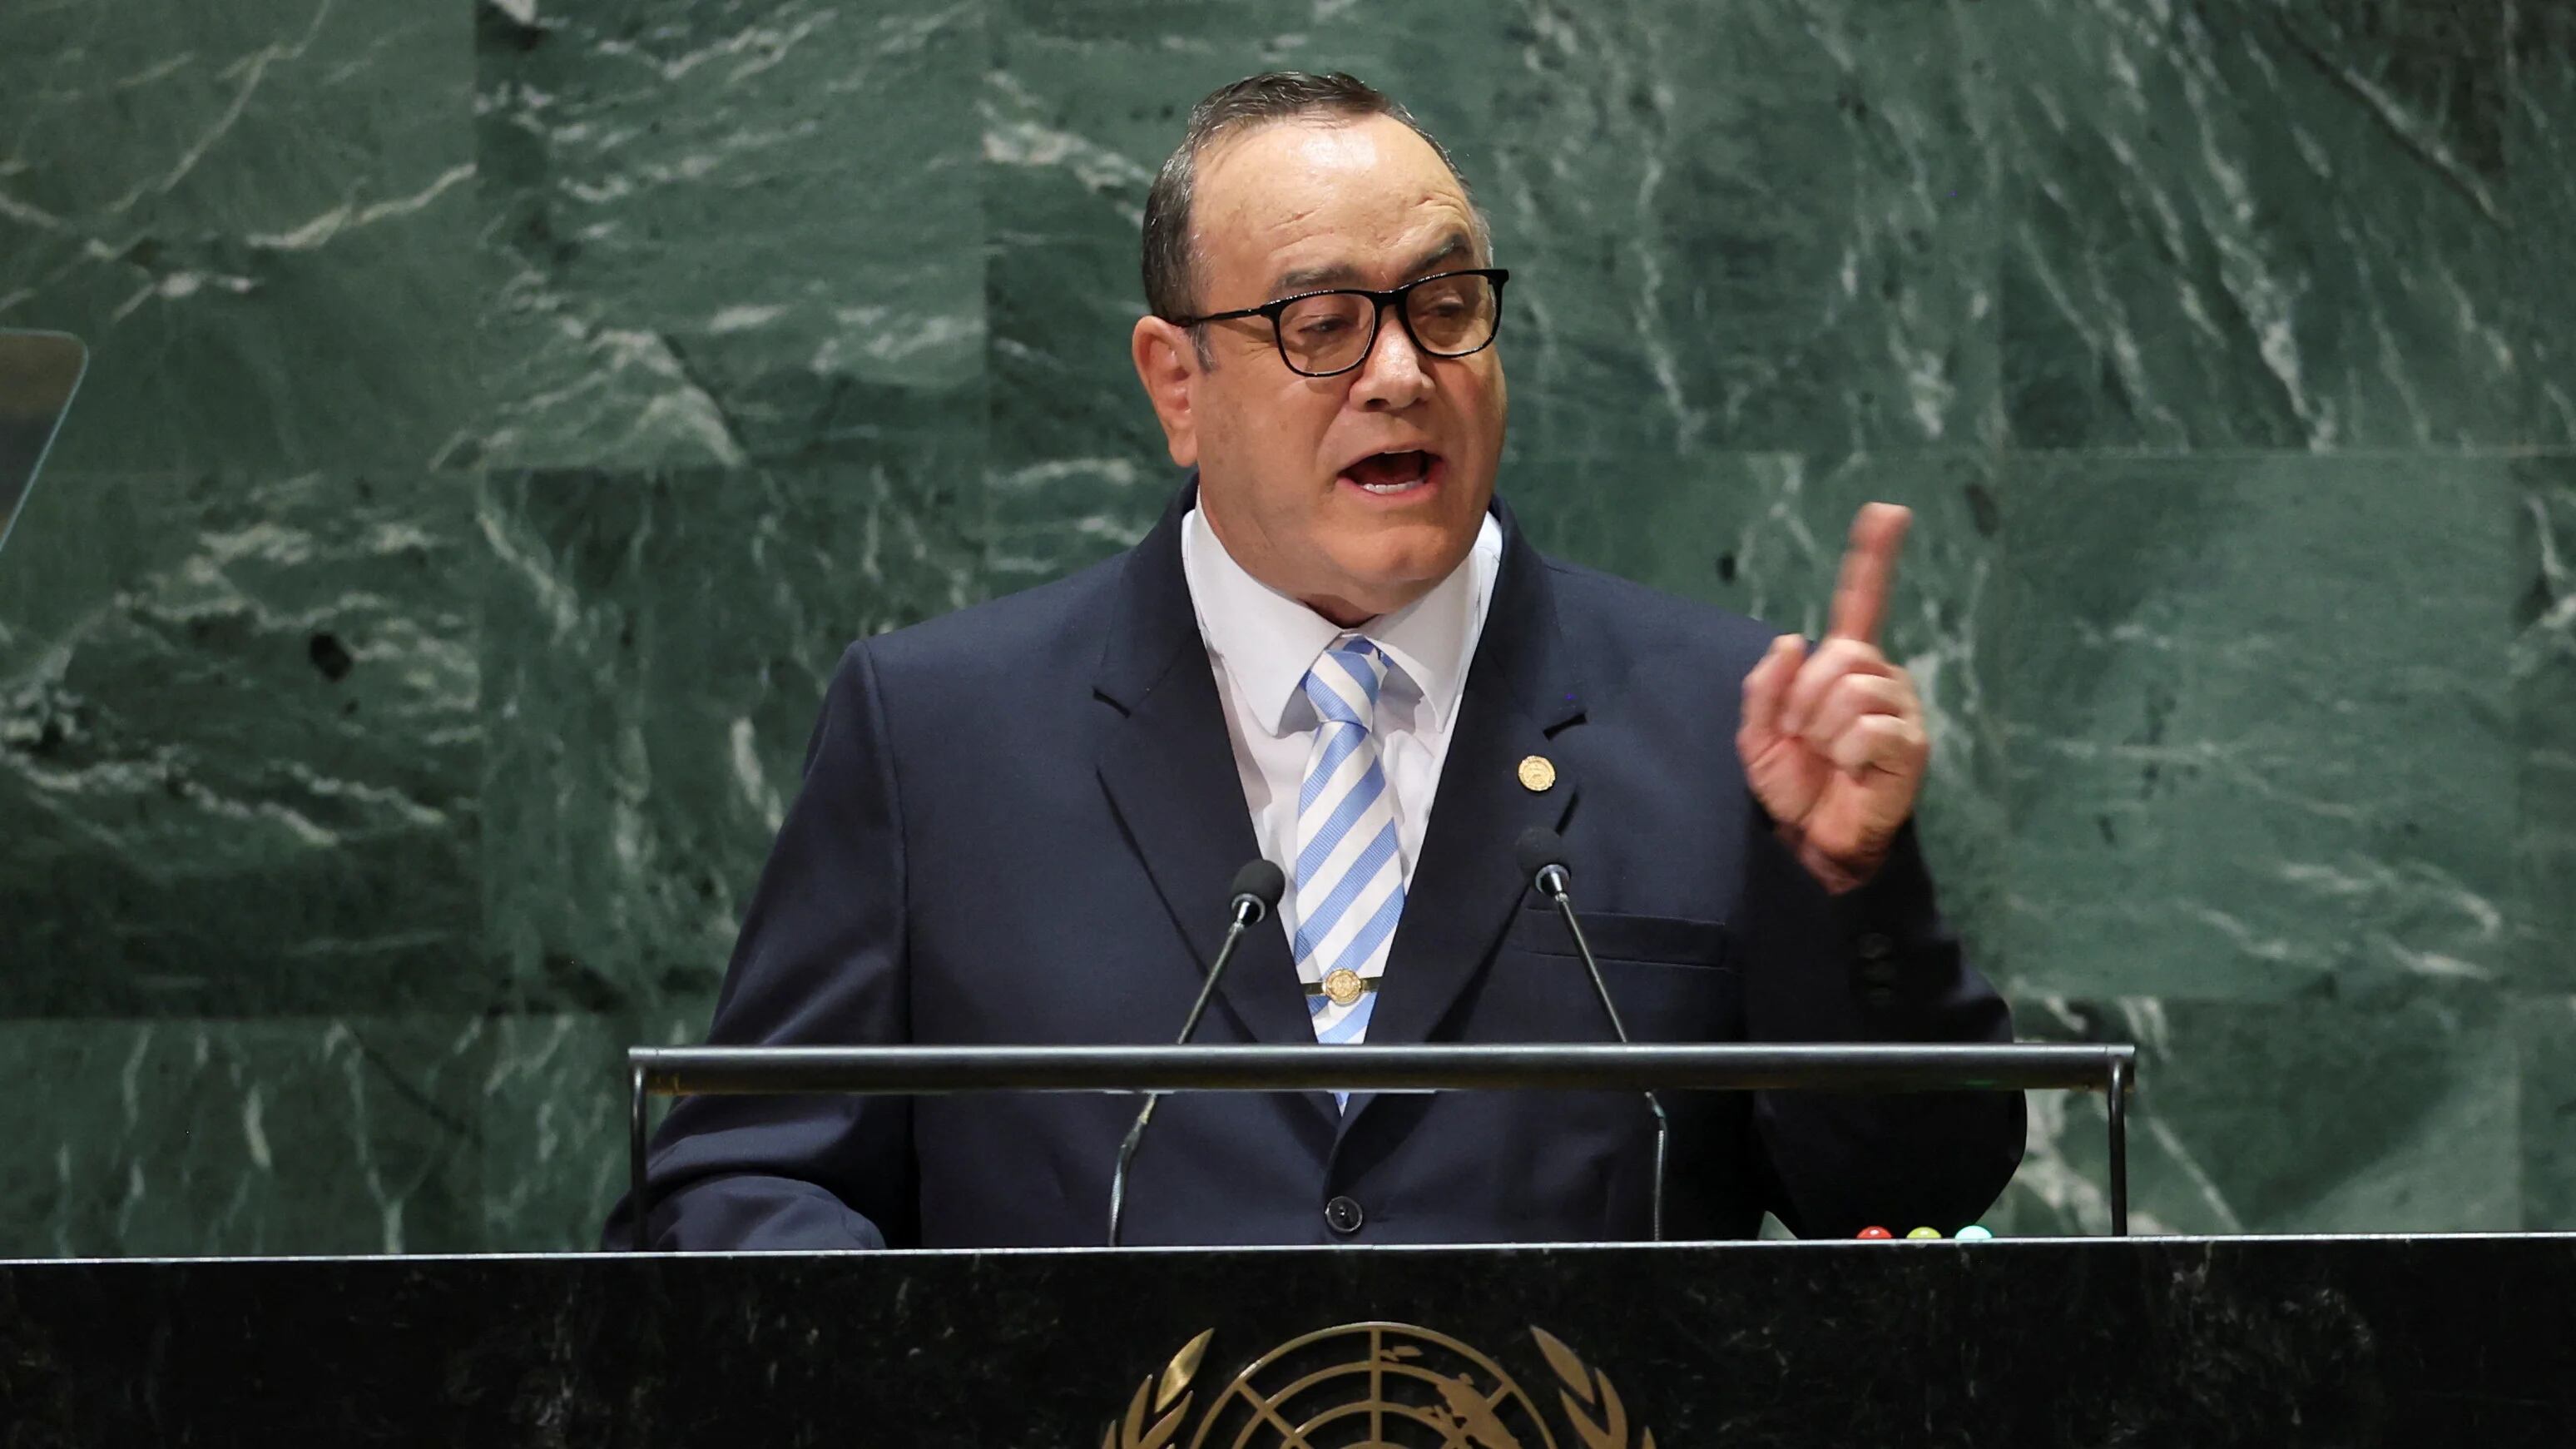 Guatemala's President Alejandro Giammattei addresses the 78th Session of the U.N. General Assembly in New York City, U.S., September 19, 2023.  REUTERS/Mike Segar